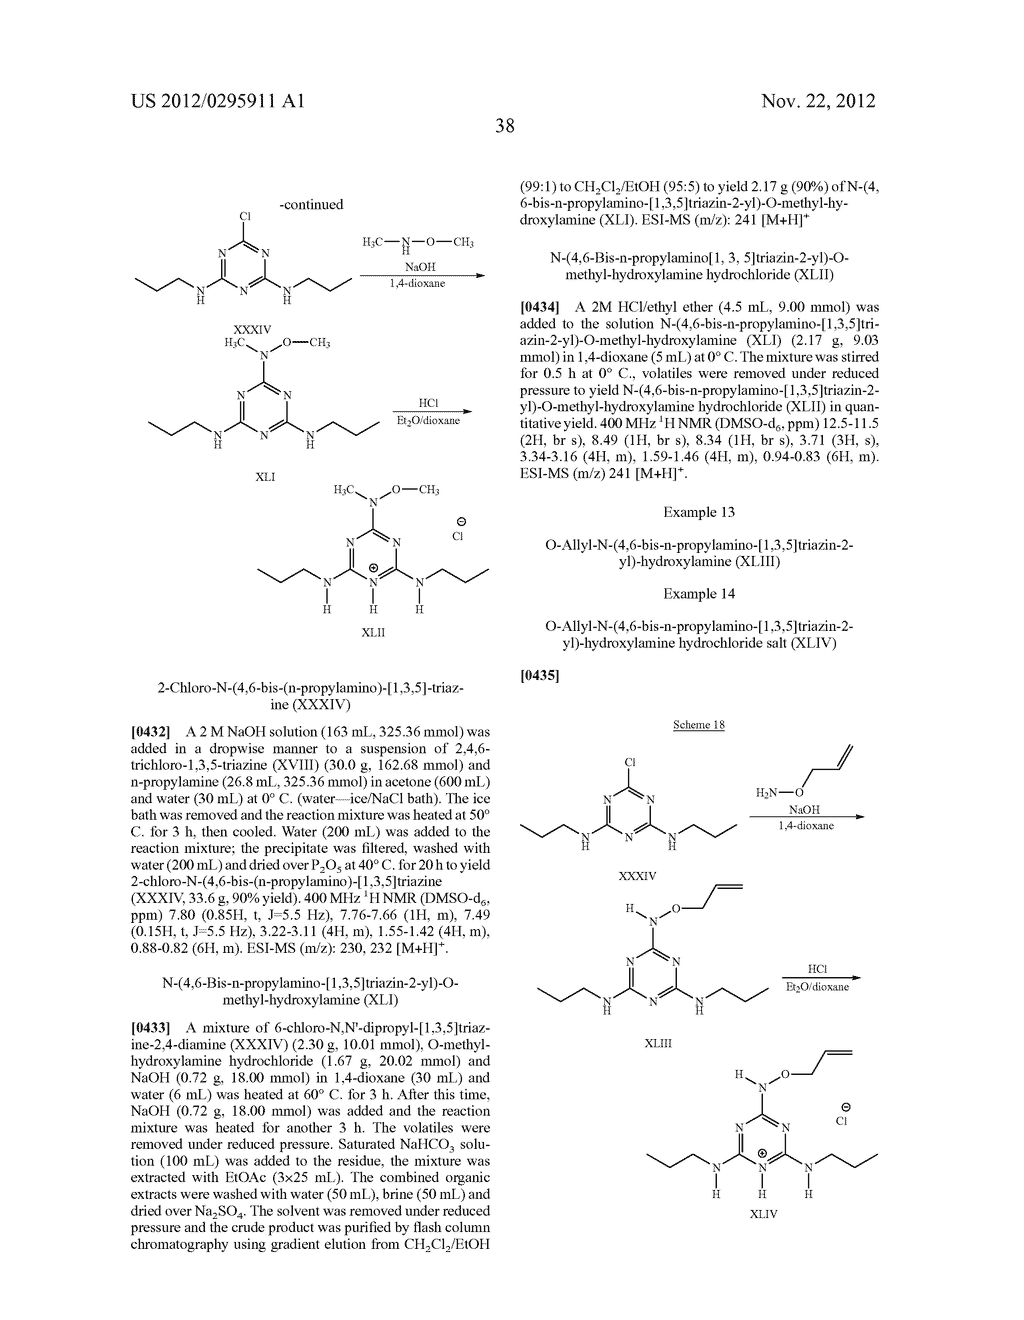 Novel Compounds and Compositions for Treatment of Breathing Control     Disorders or Diseases - diagram, schematic, and image 85